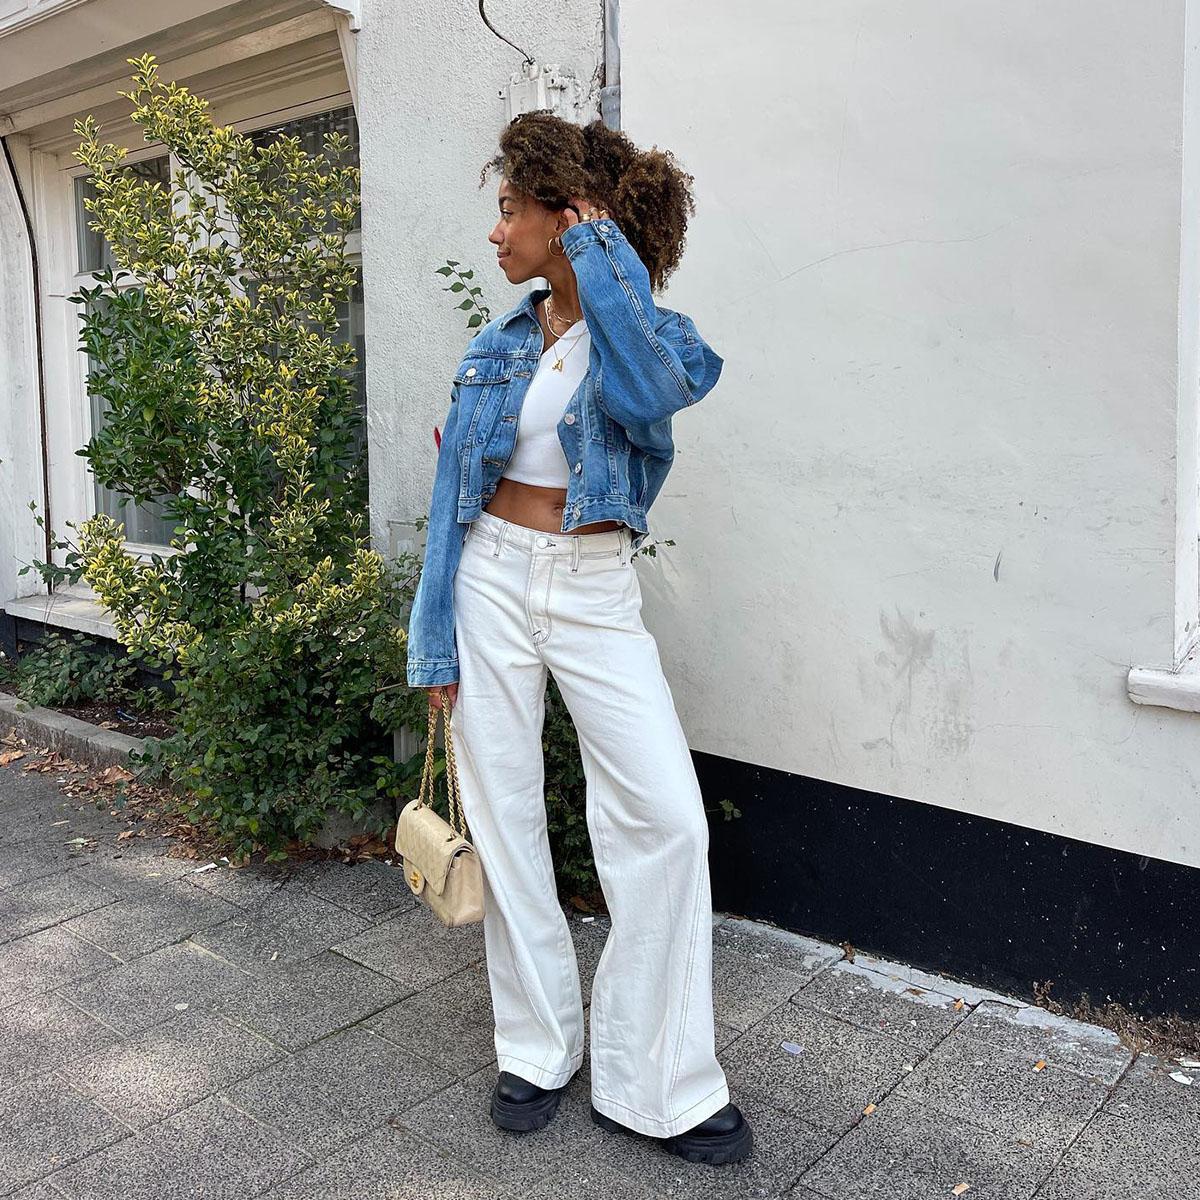 5 Shoes to Wear With Wide-Leg Jeans